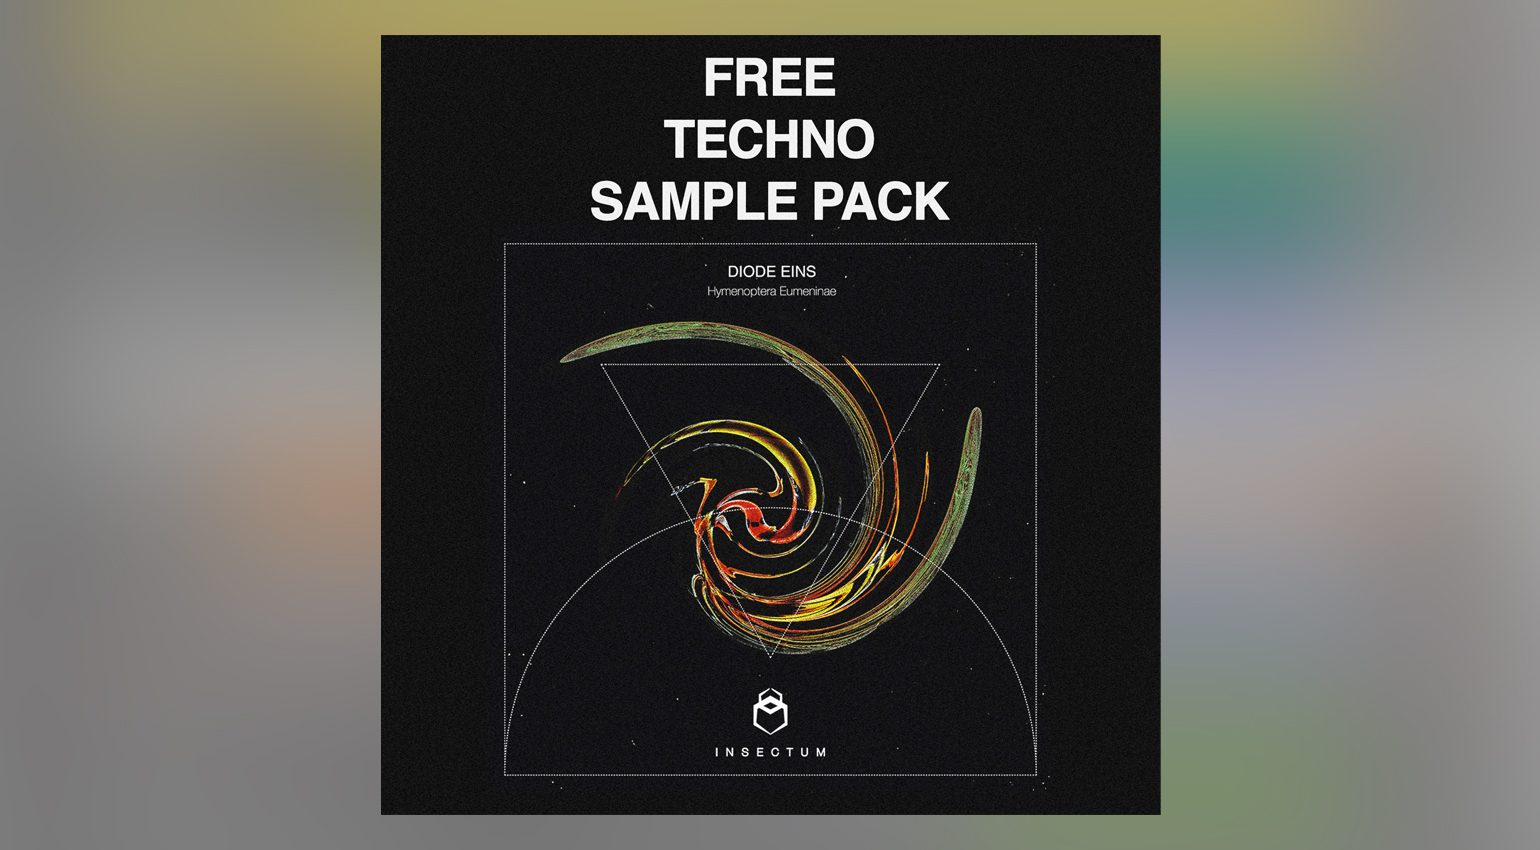 Diode Eins Free Techno Sample Pack